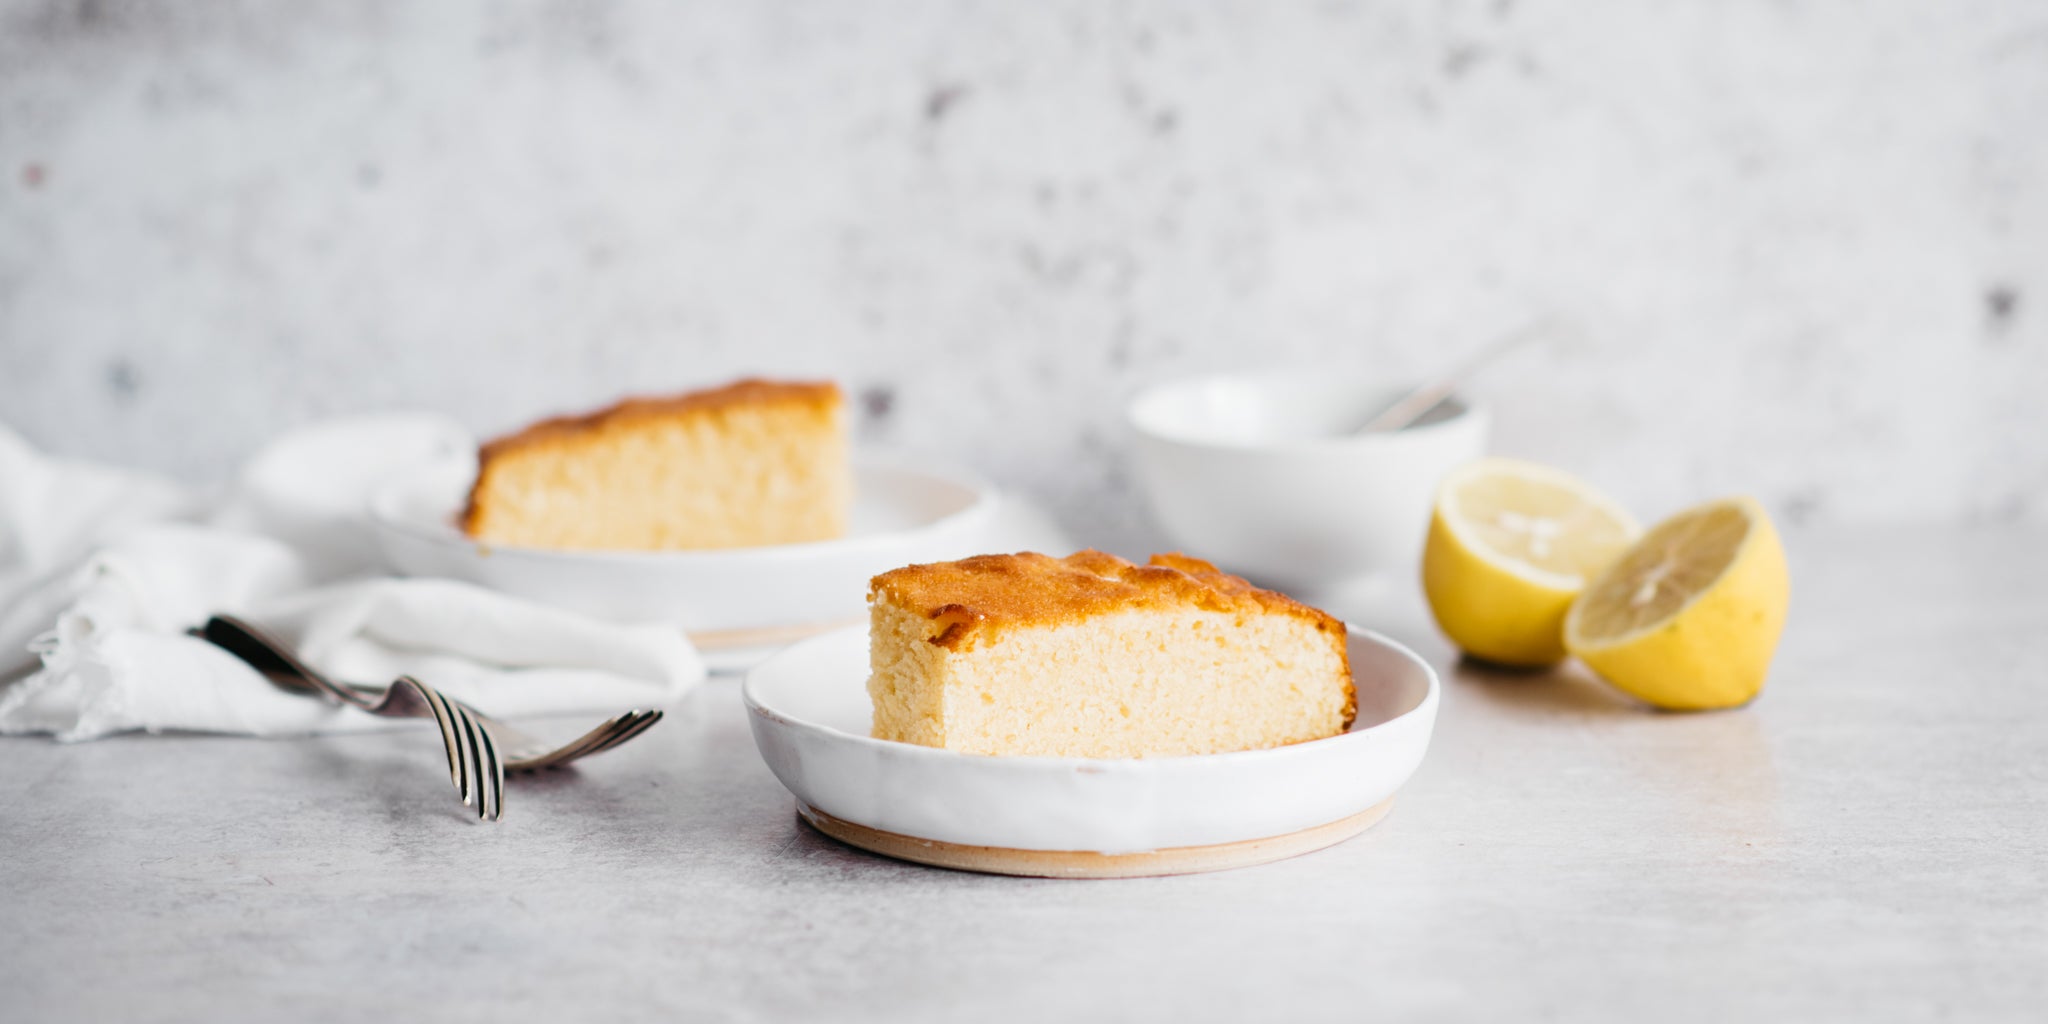 Slice of lemon drizzle on a white plate with sliced lemon beside it